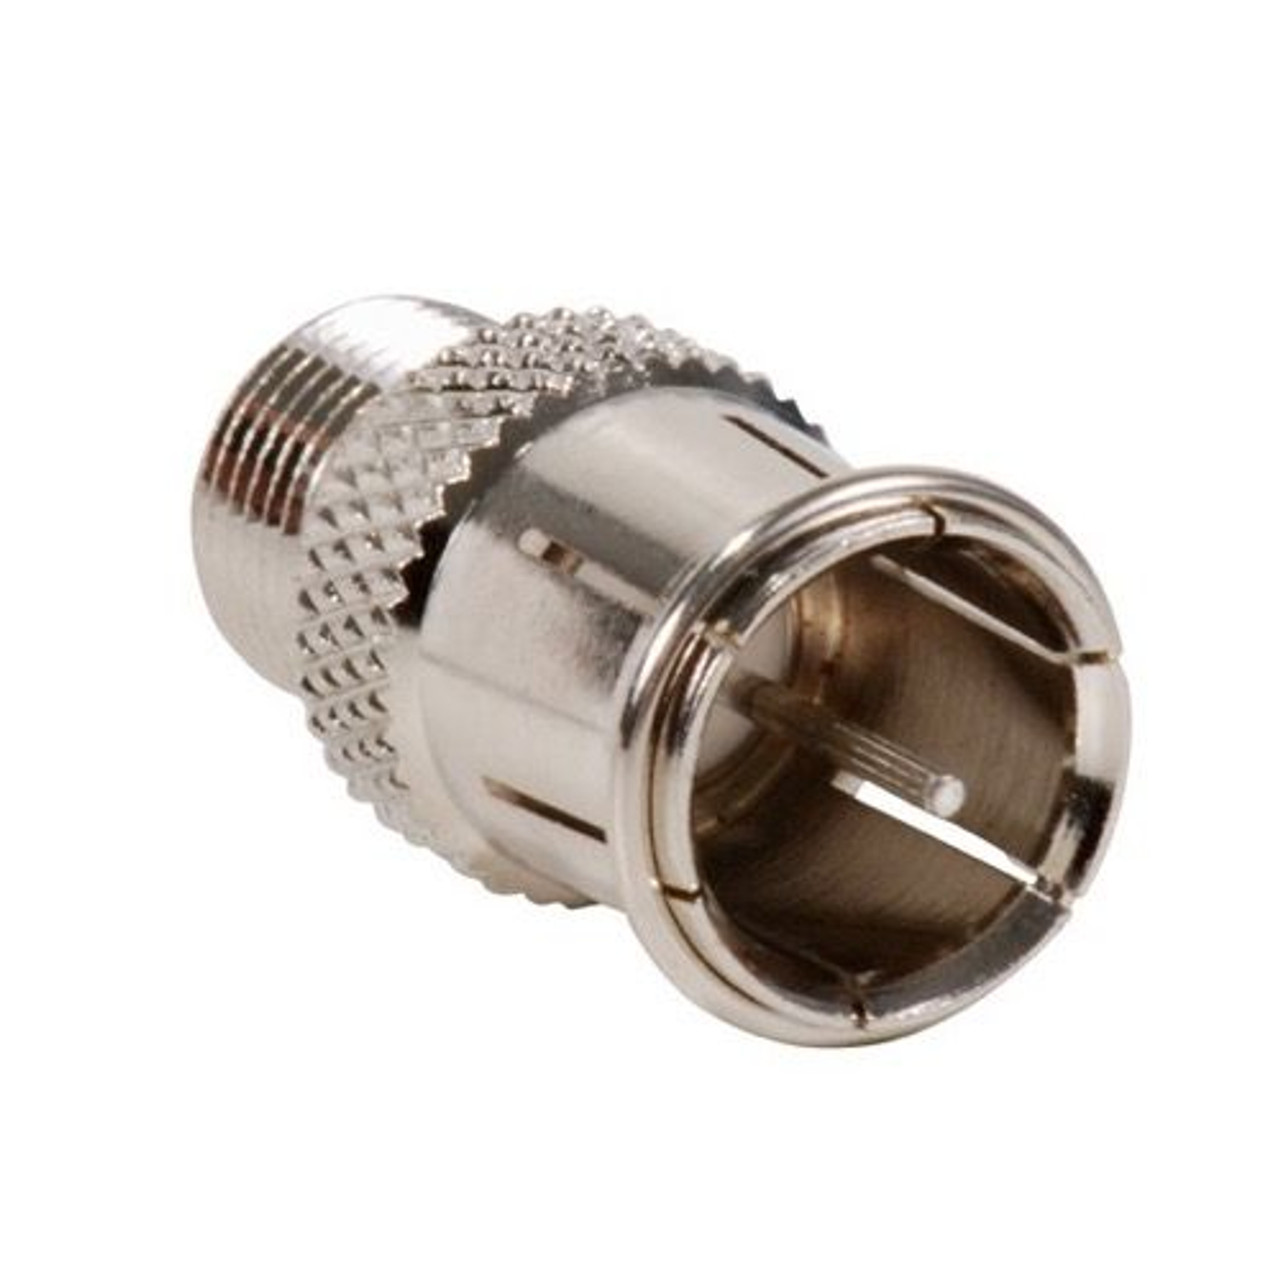 Eagle Aspen FQ-5-ZB Quick F Male Adapter Connector Push-On F Connector F-Male to F Quick Plug Adapter Push-On Plug Female to Male Disconnect Coaxial Cable Plug Signal TV Video Component Connection